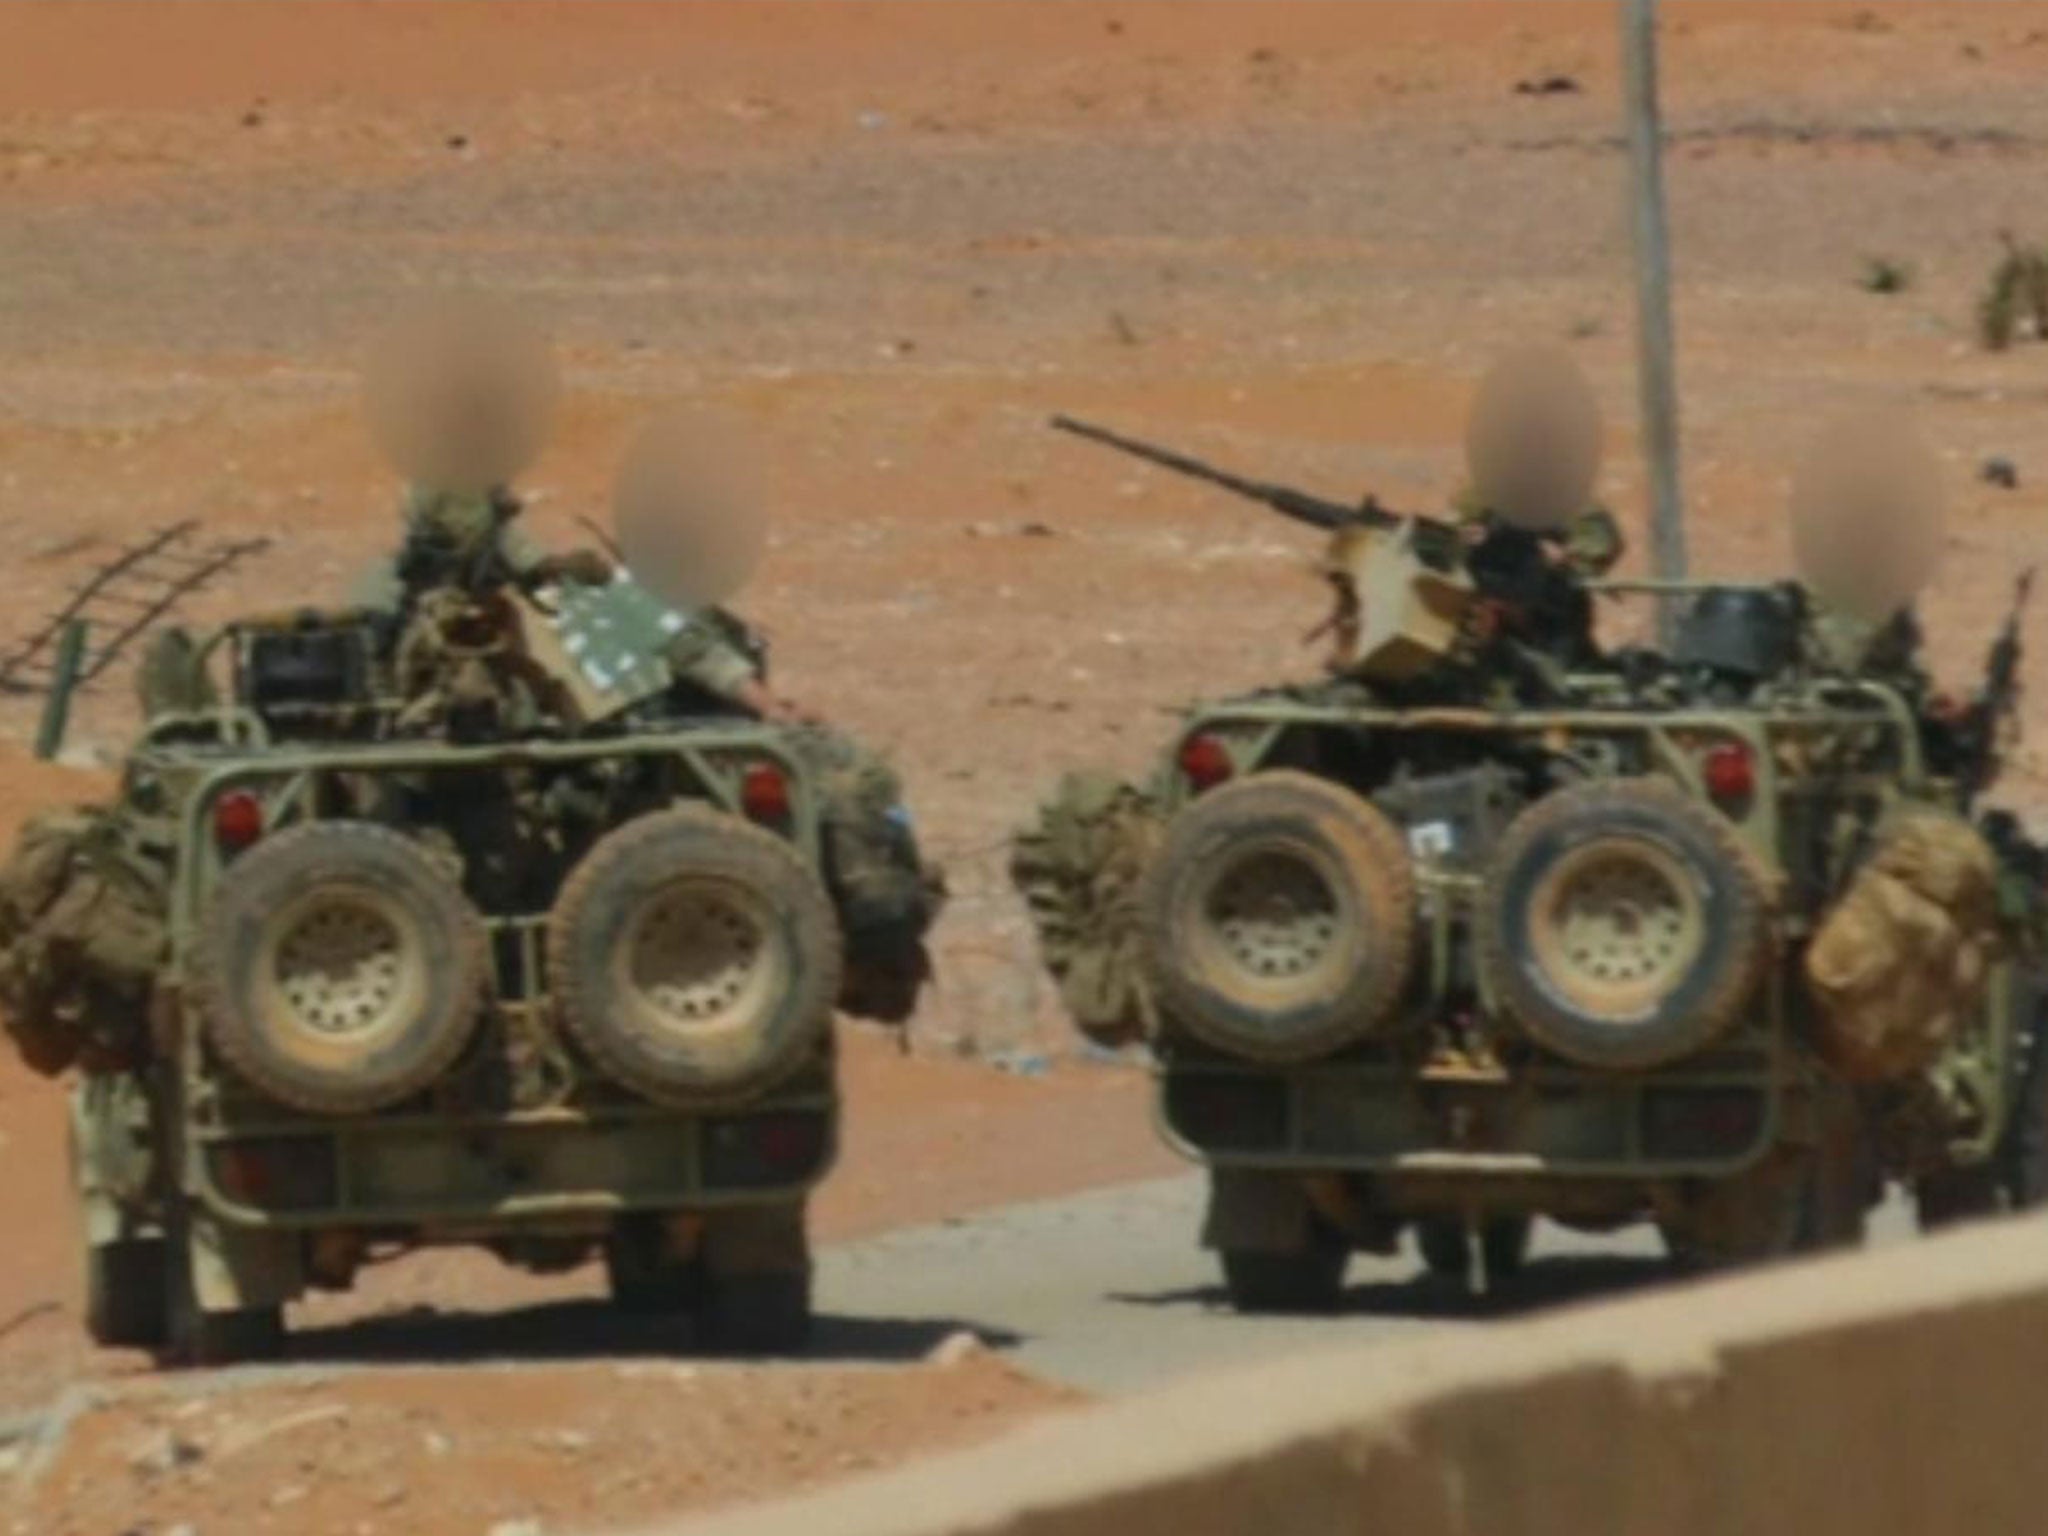 A photo appearing to show British special forces operating near al-Tanf in Syria in June